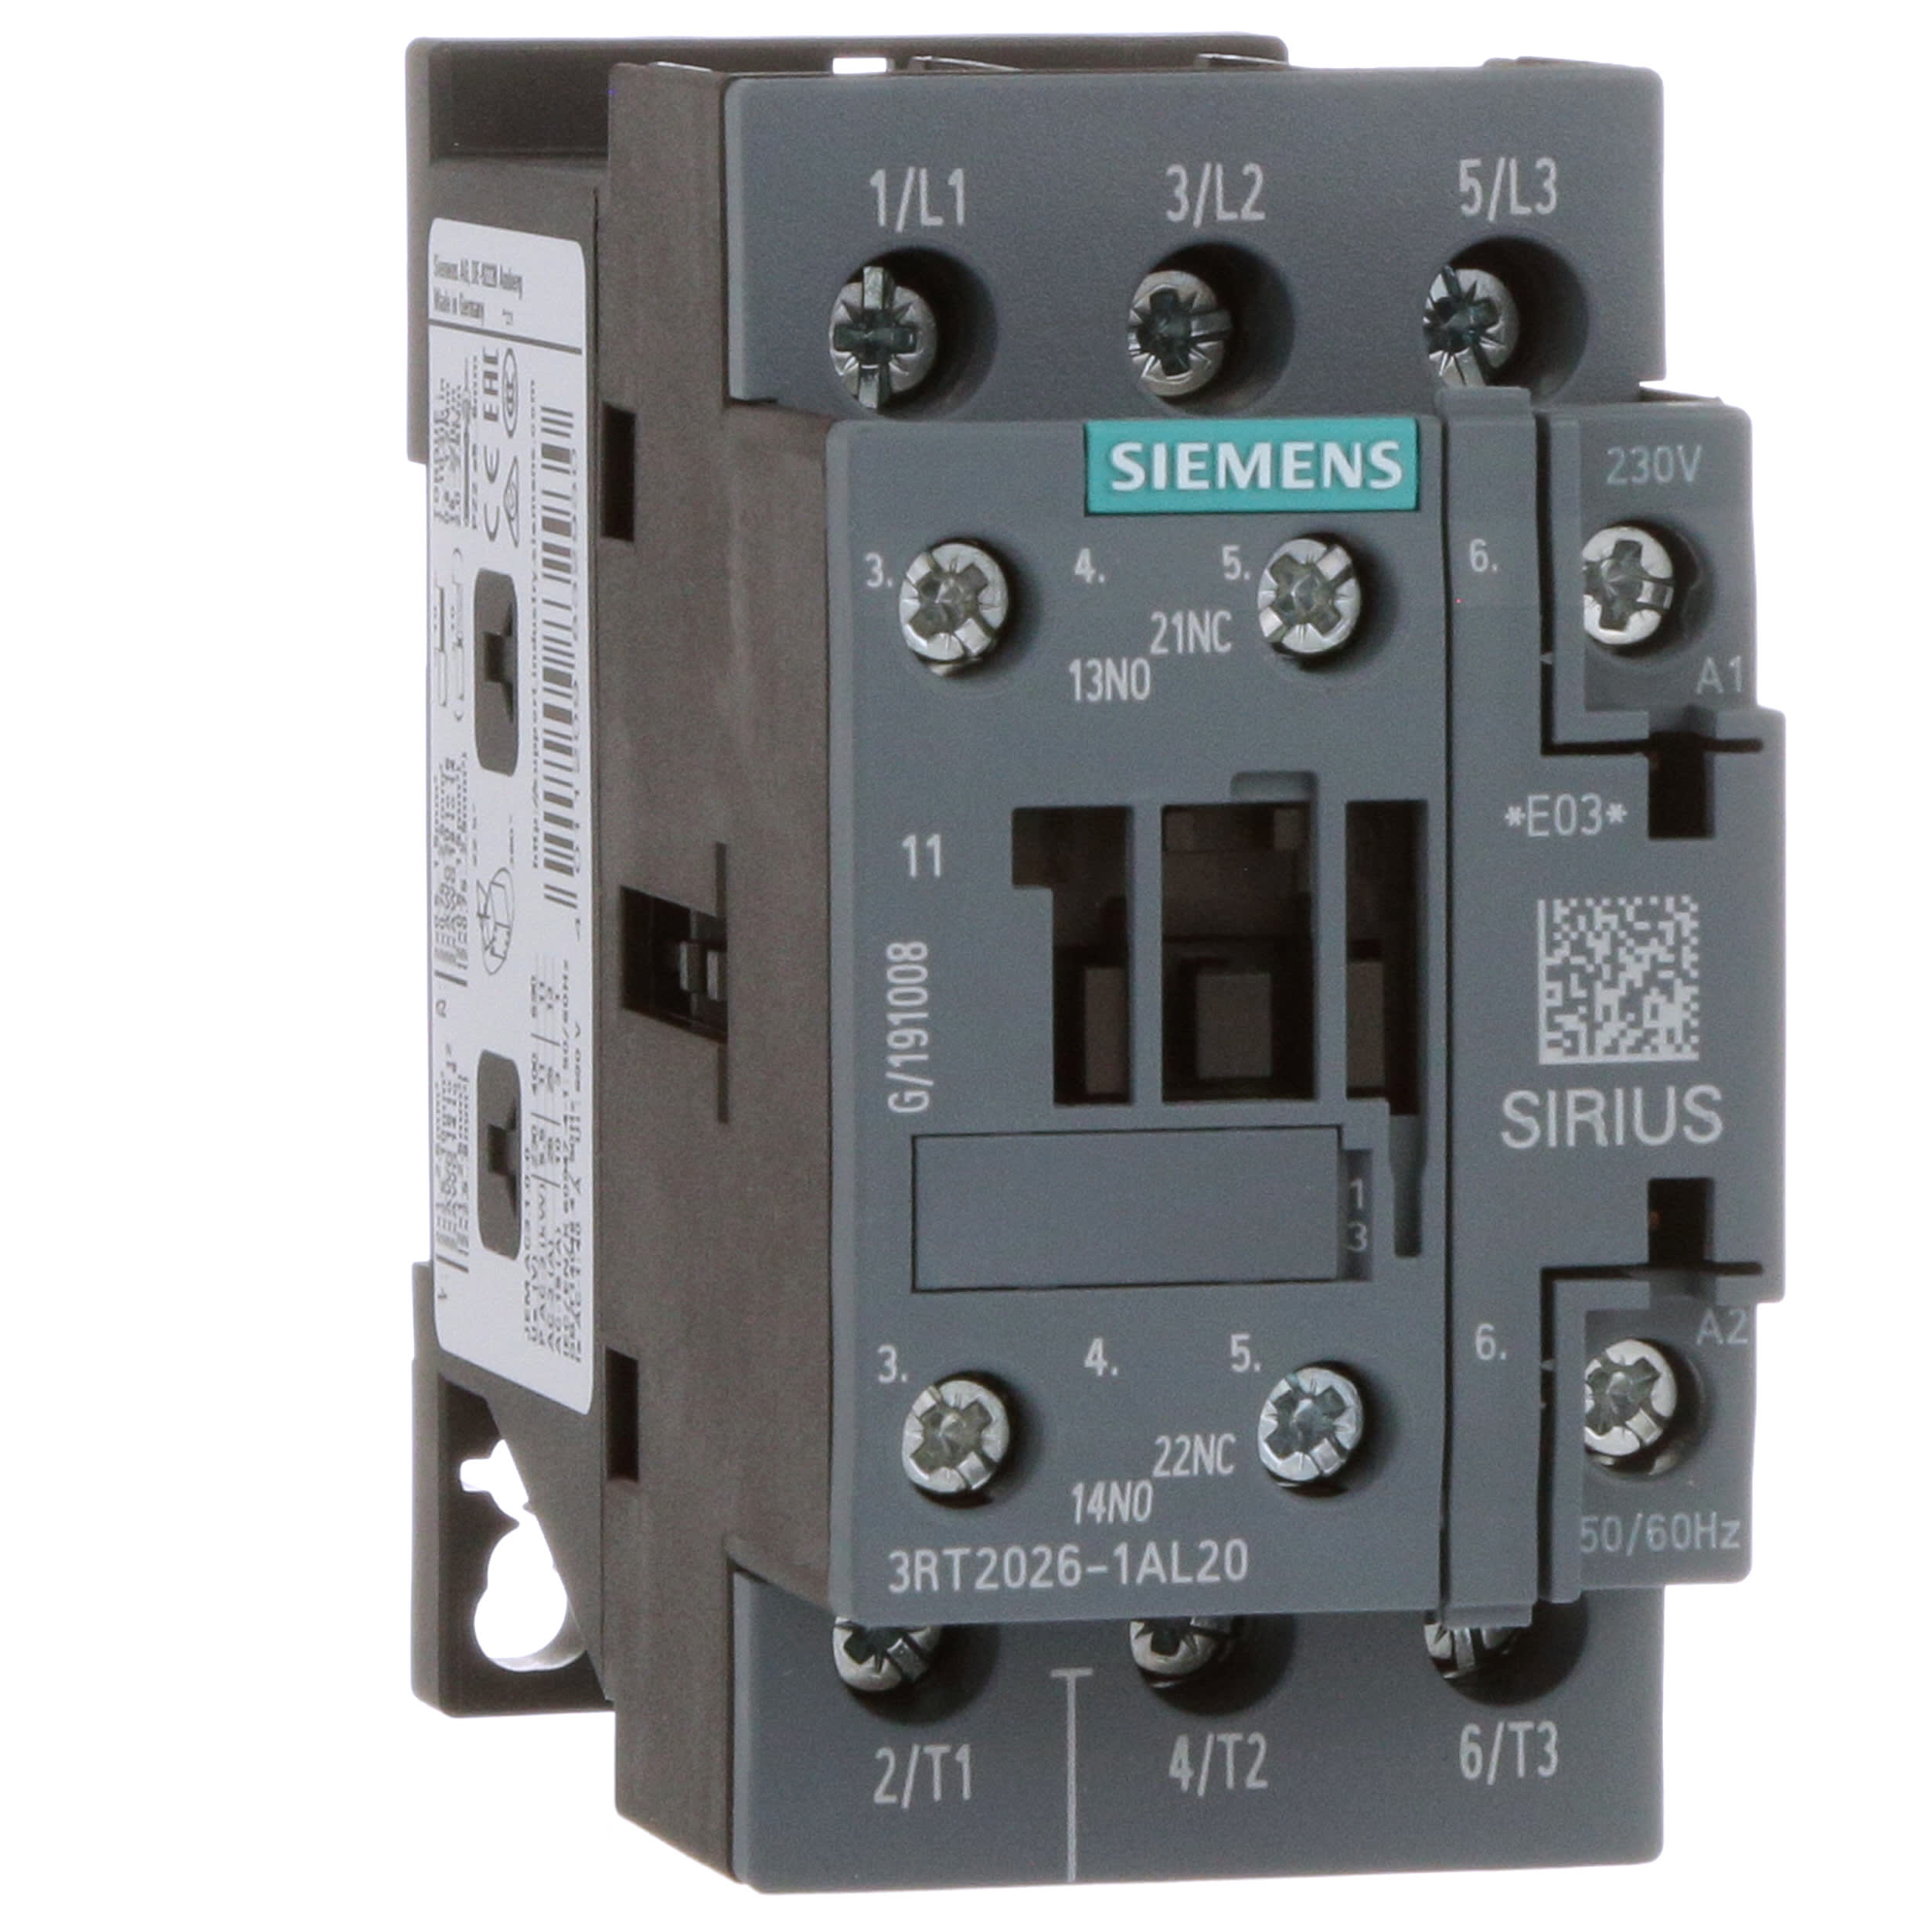 Siemens 3RT15 26-1AC20 Special Application Contactor AC Operation 50/60 Hz Rated Control Supply Voltage 3RT15261AC20 24 V S0 Size Screw Connection 20HP Maximum HP Rating at 460VAC 